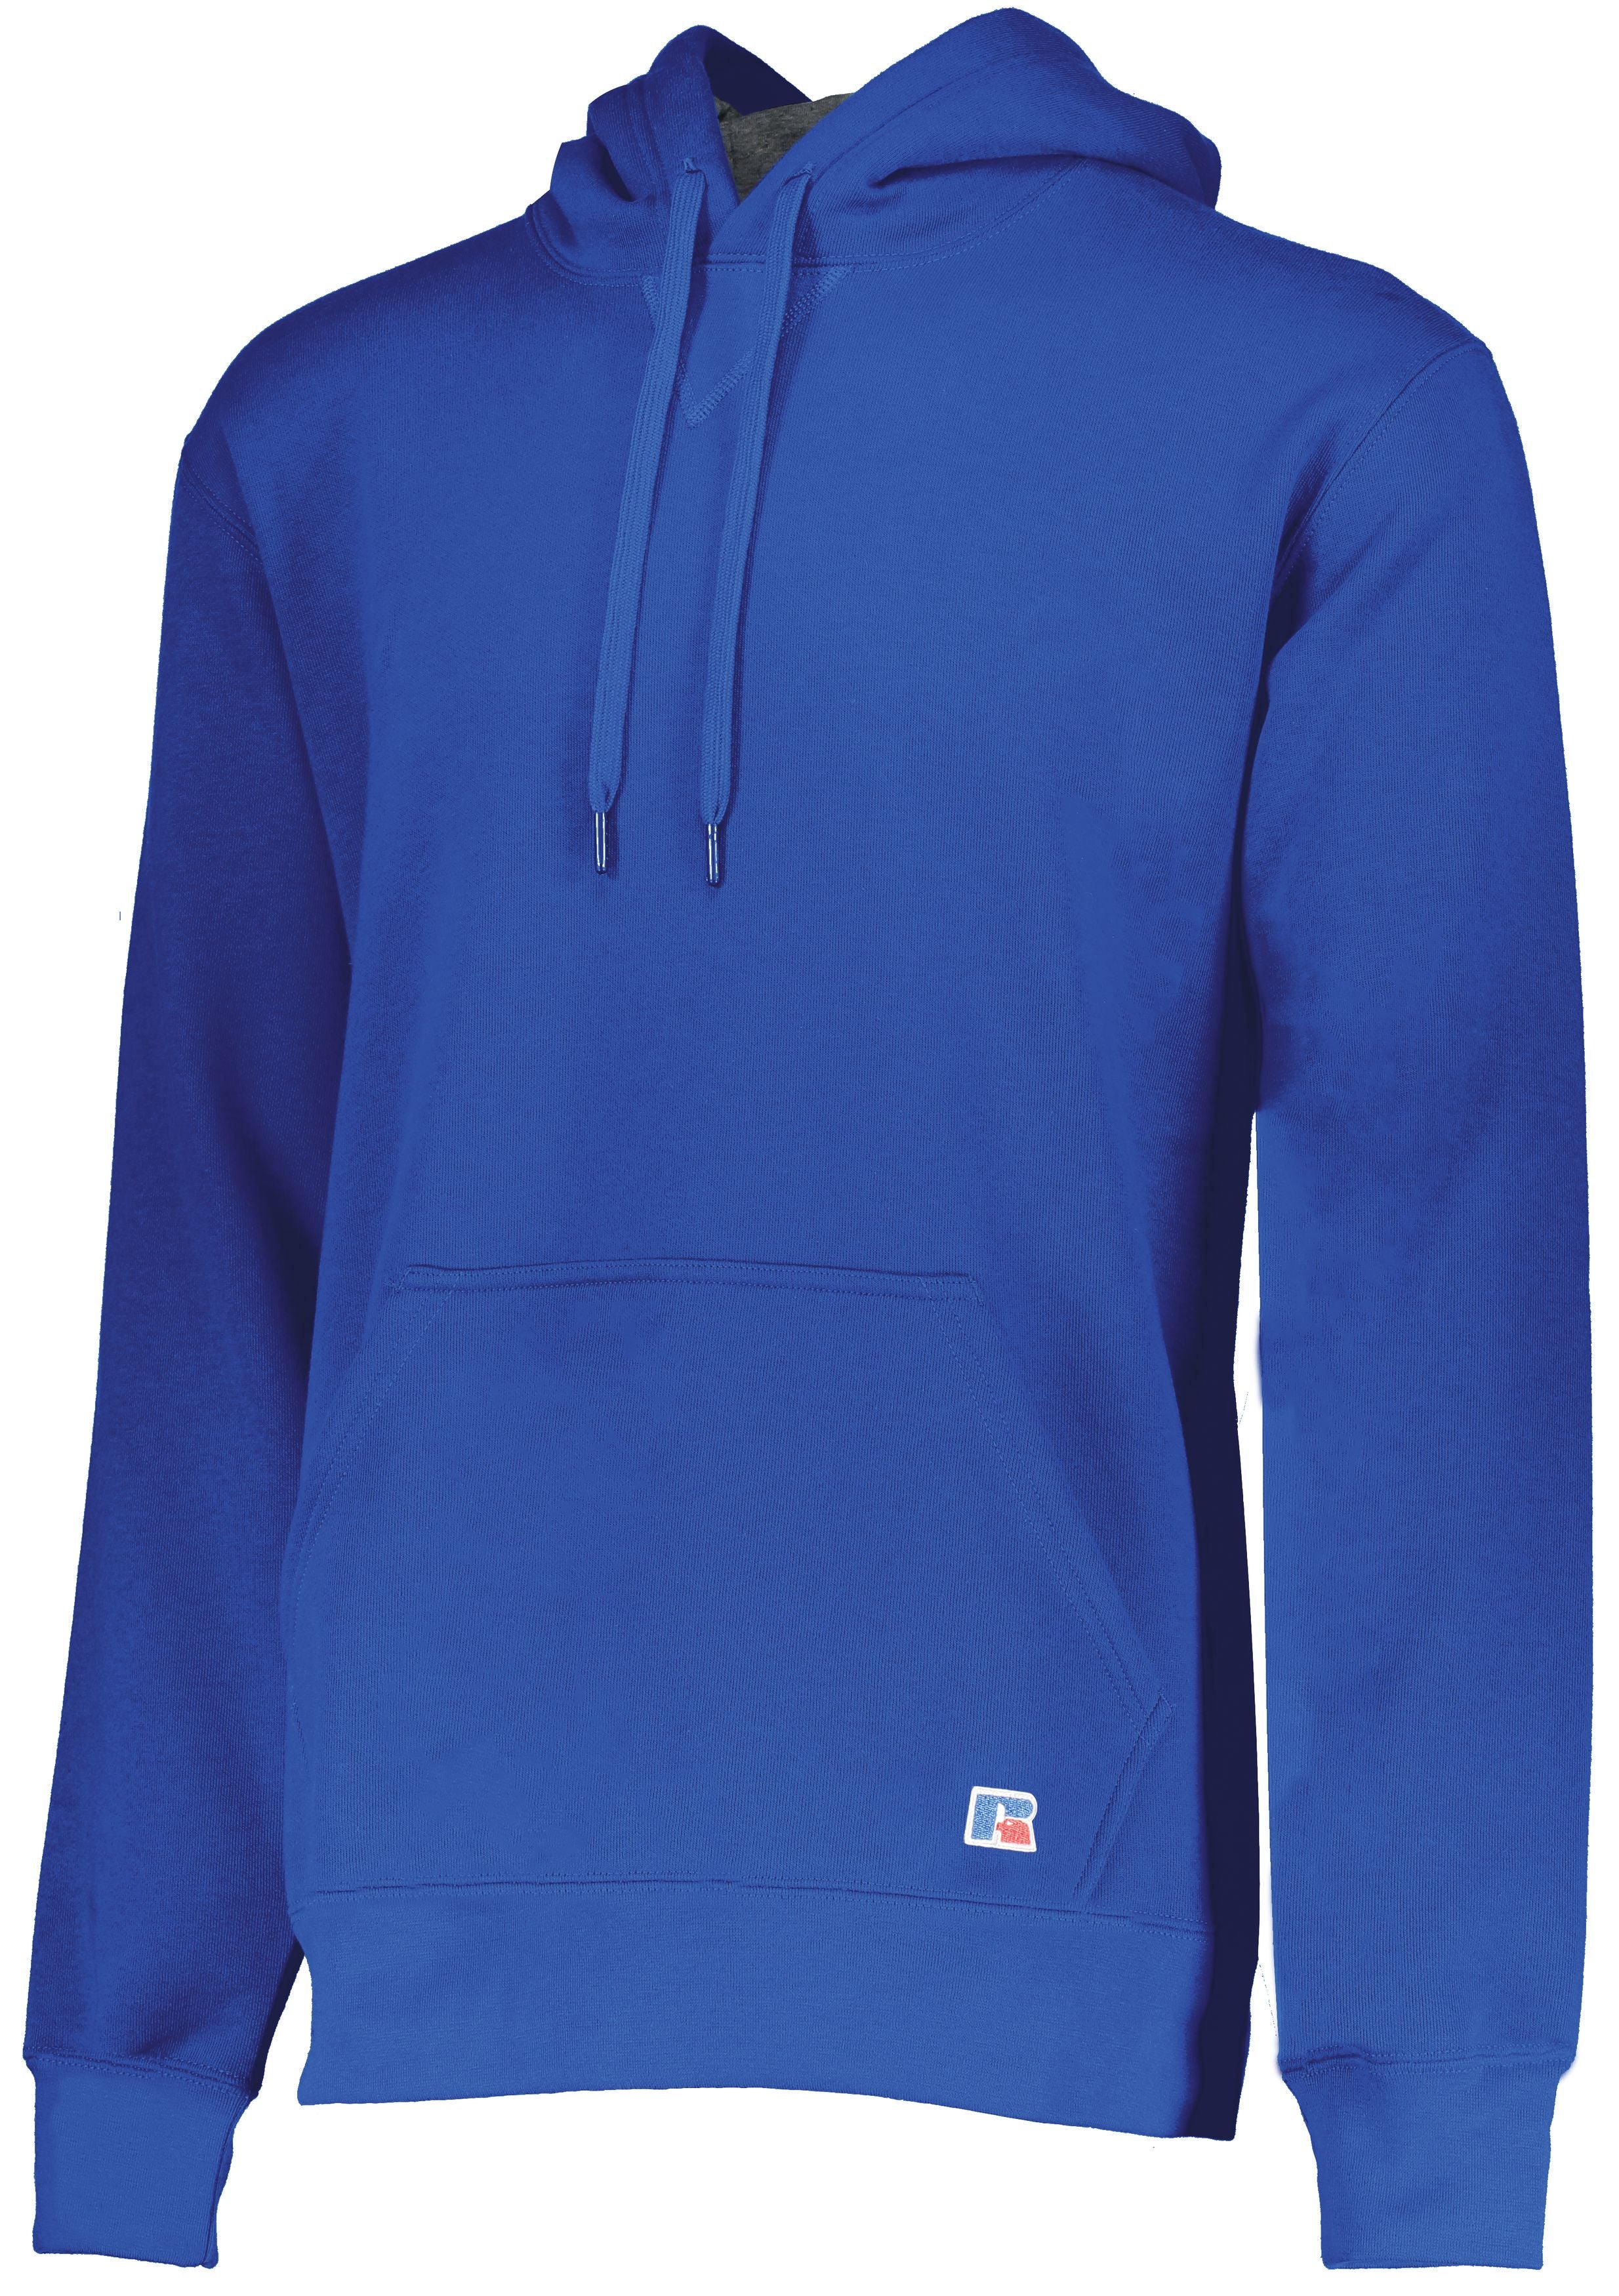 Russell Athletic 80/20 Fleece Hoodie in Royal  -Part of the Adult, Russell-Athletic-Products, Shirts product lines at KanaleyCreations.com